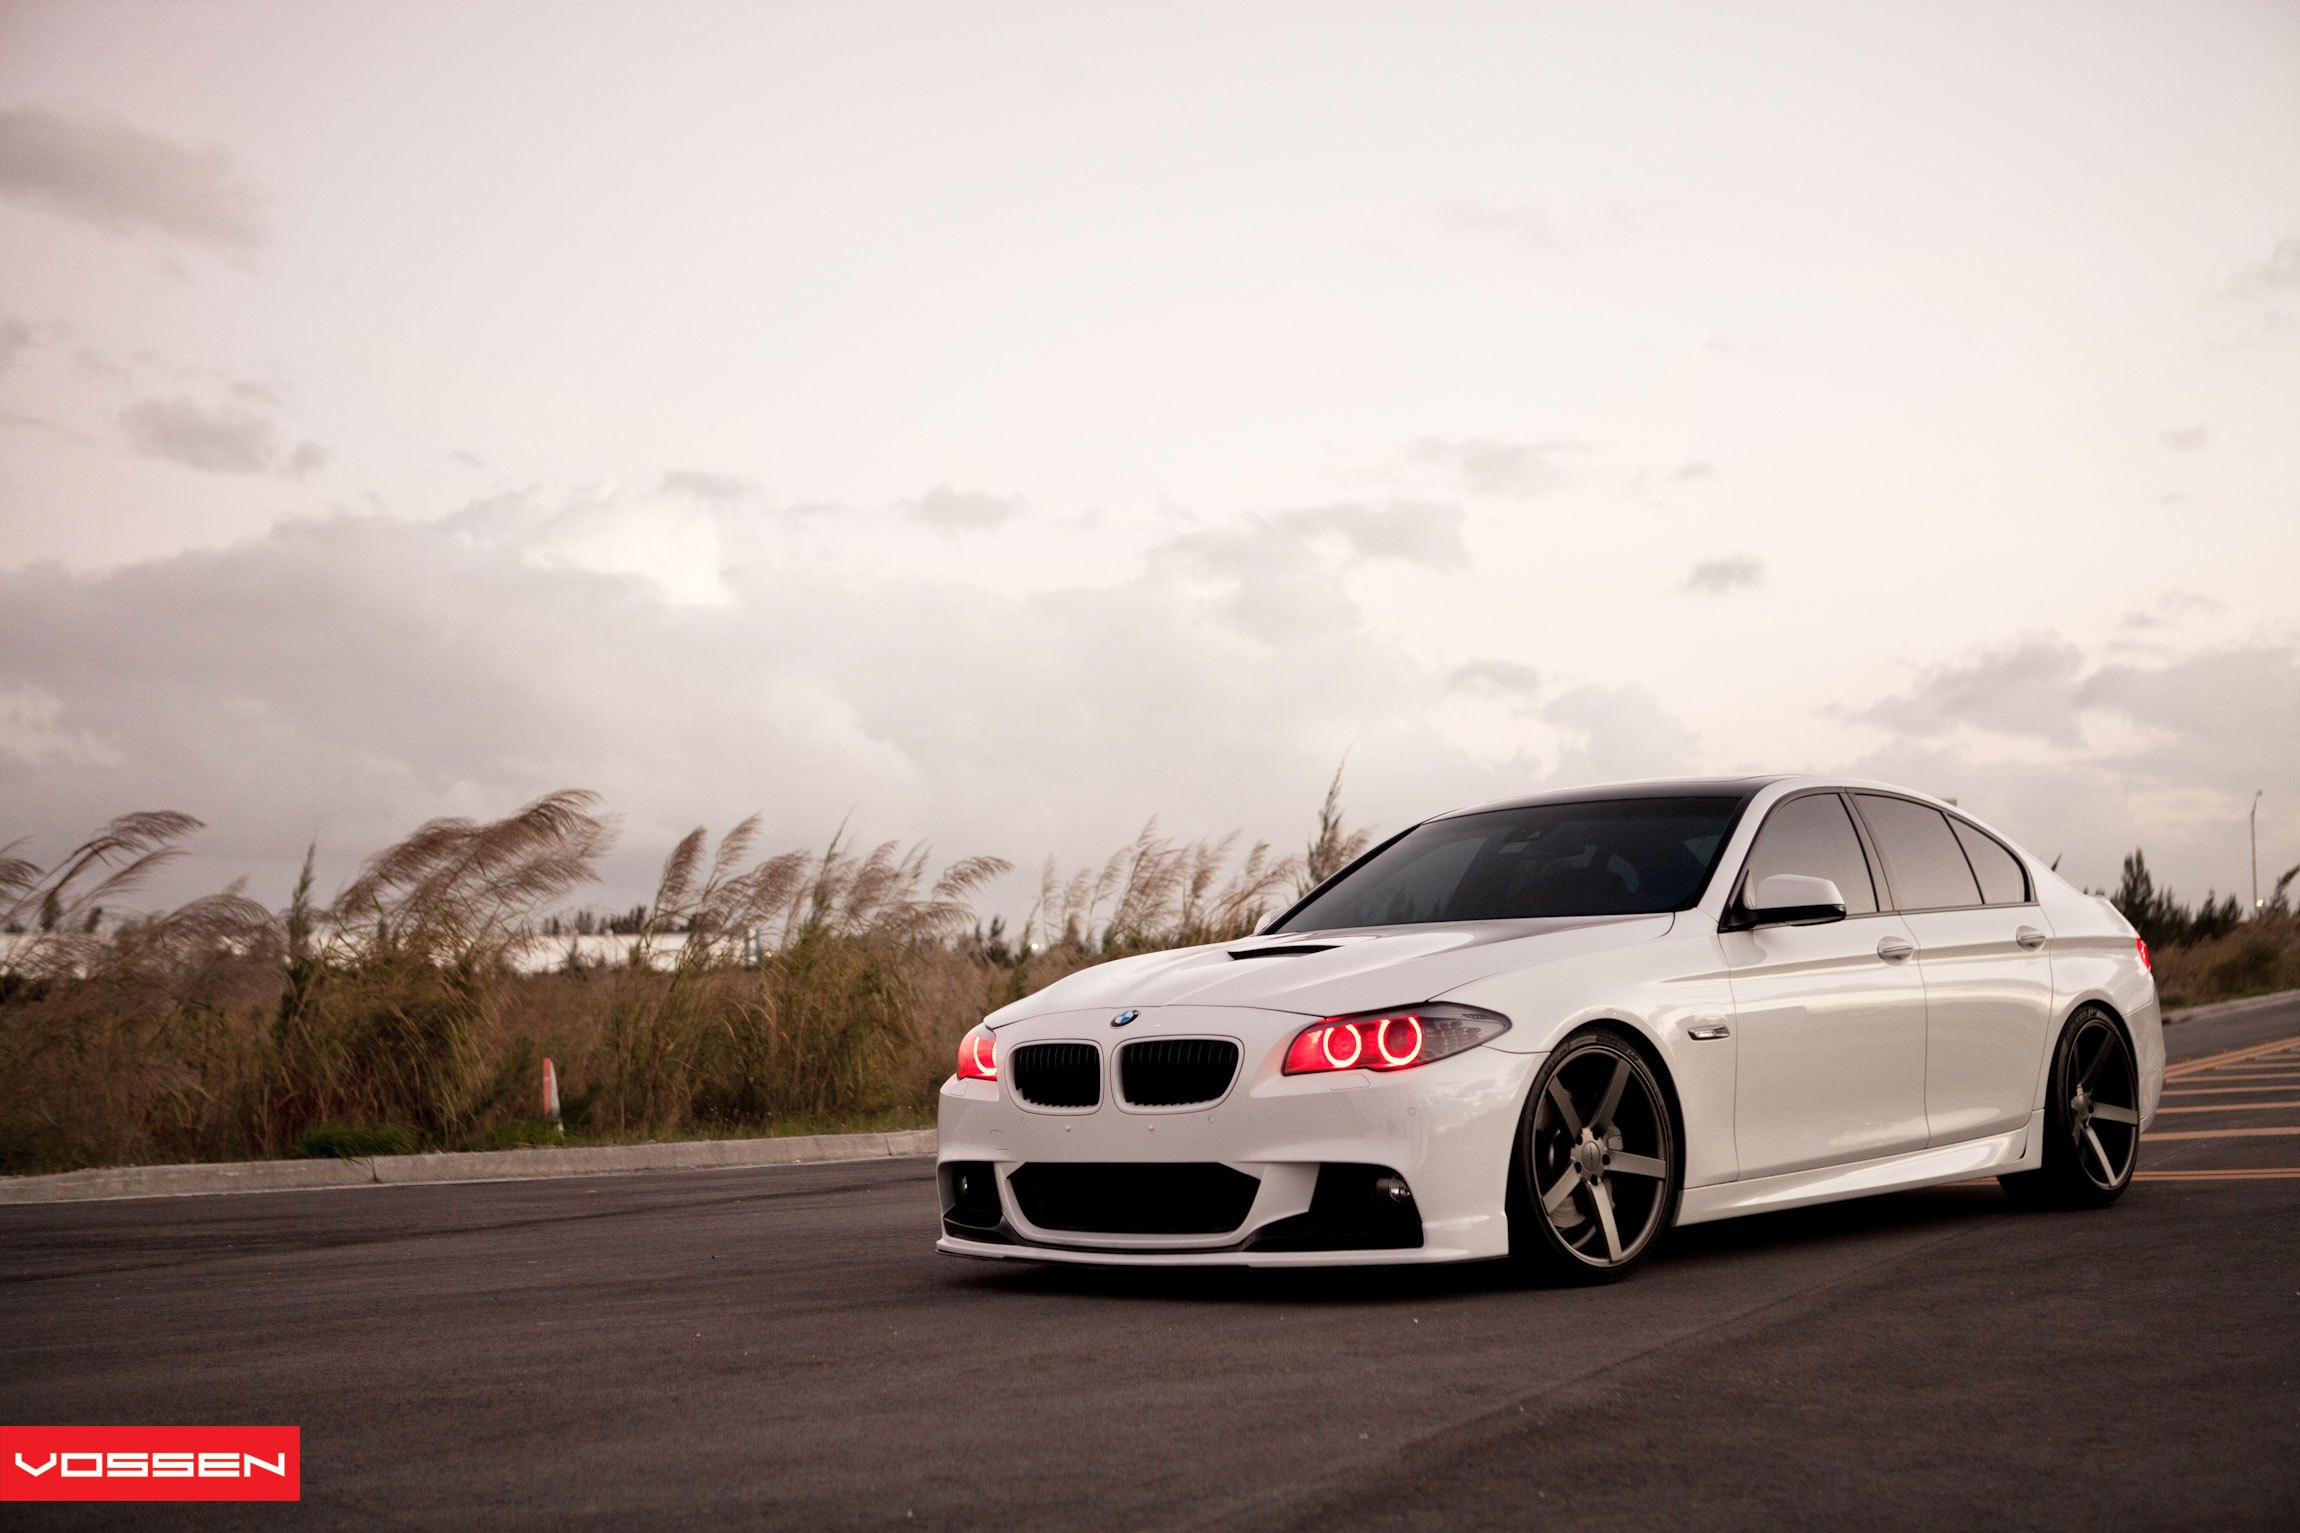 Aftermarket Hood with Air Vent on BMW 5-Series - Photo by Vossen